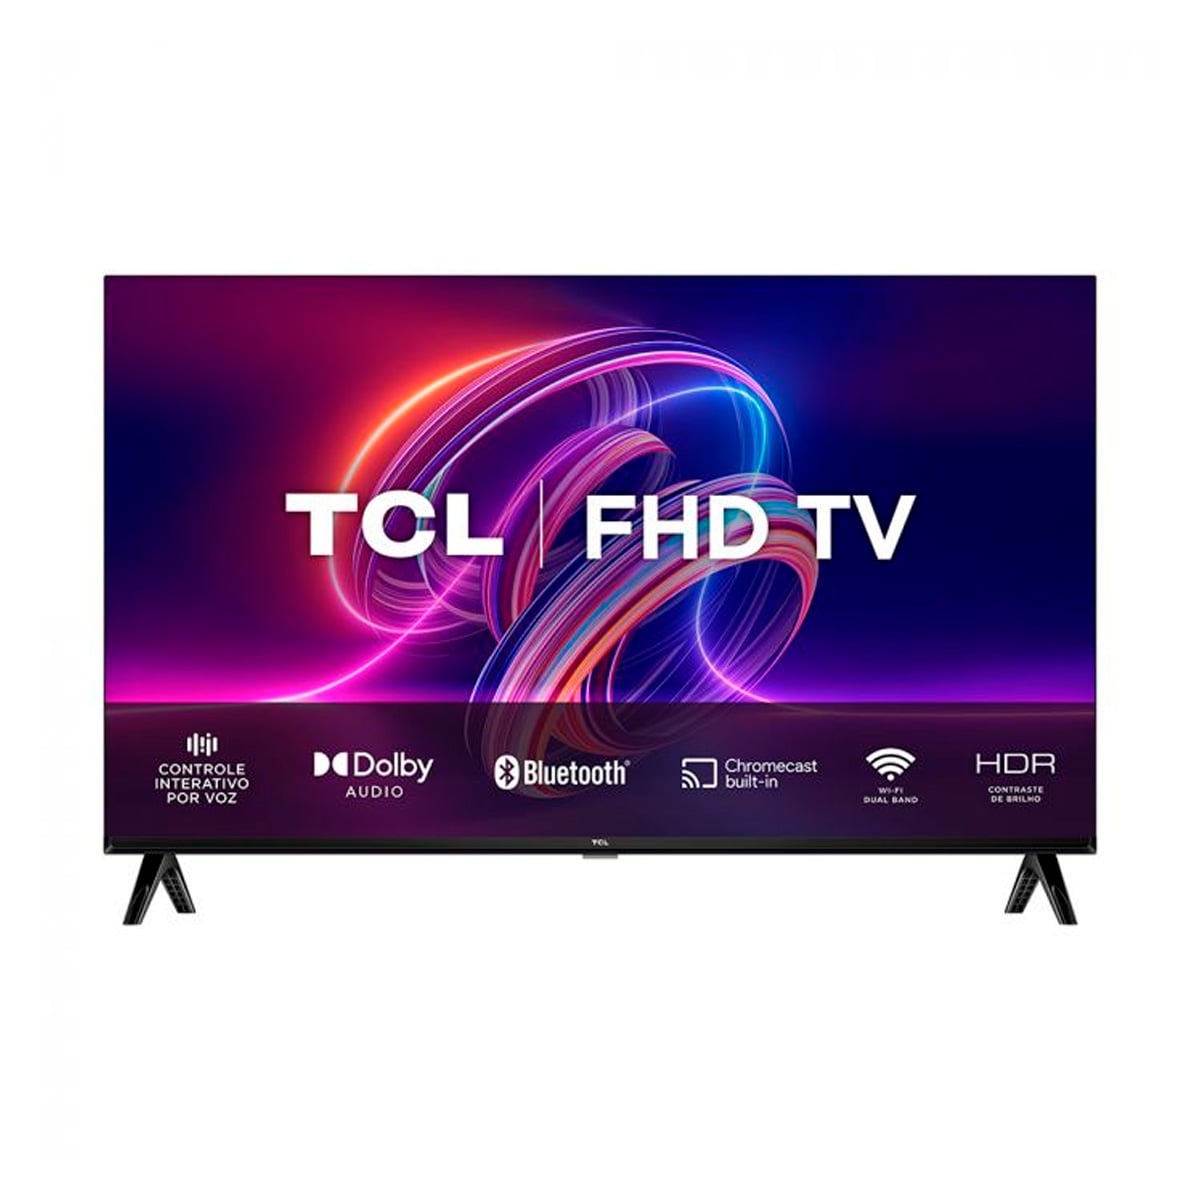 Smart TV 32 TCL LED Full HD 32S5400AF, Android TV, 2 HDMI, 1 USB